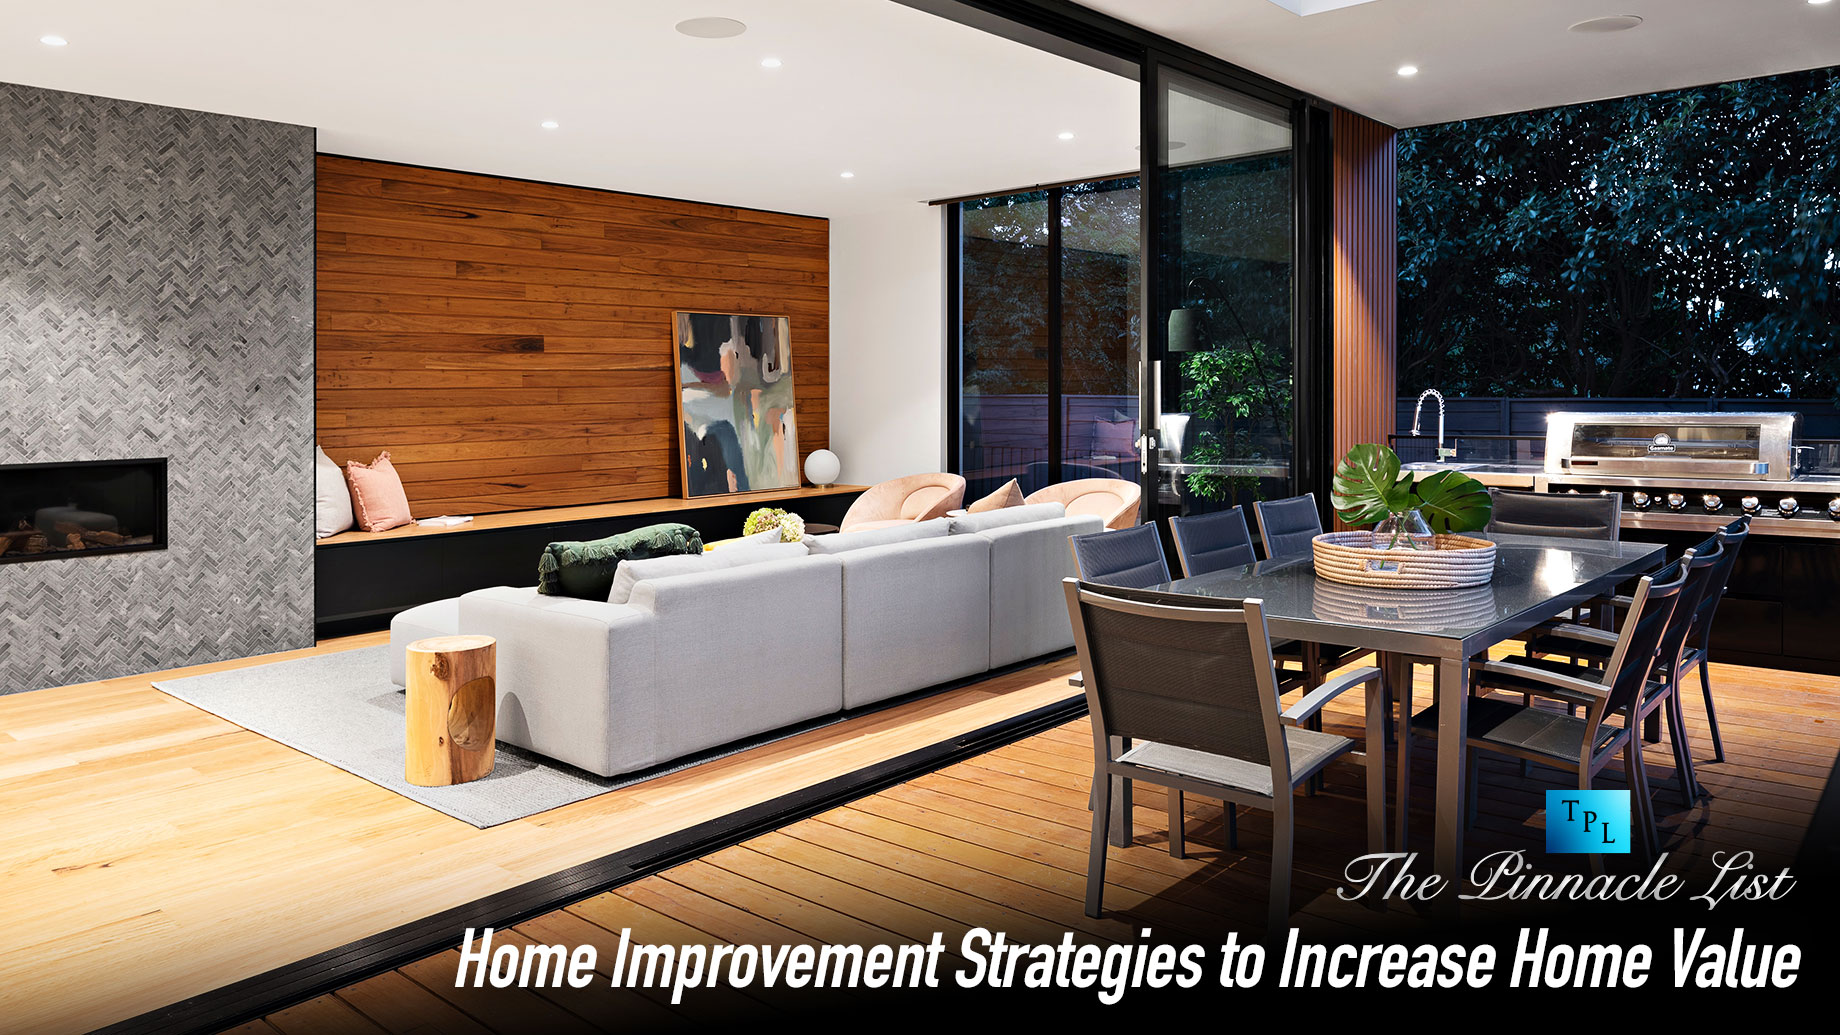 Home Improvement Strategies to Increase Home Value